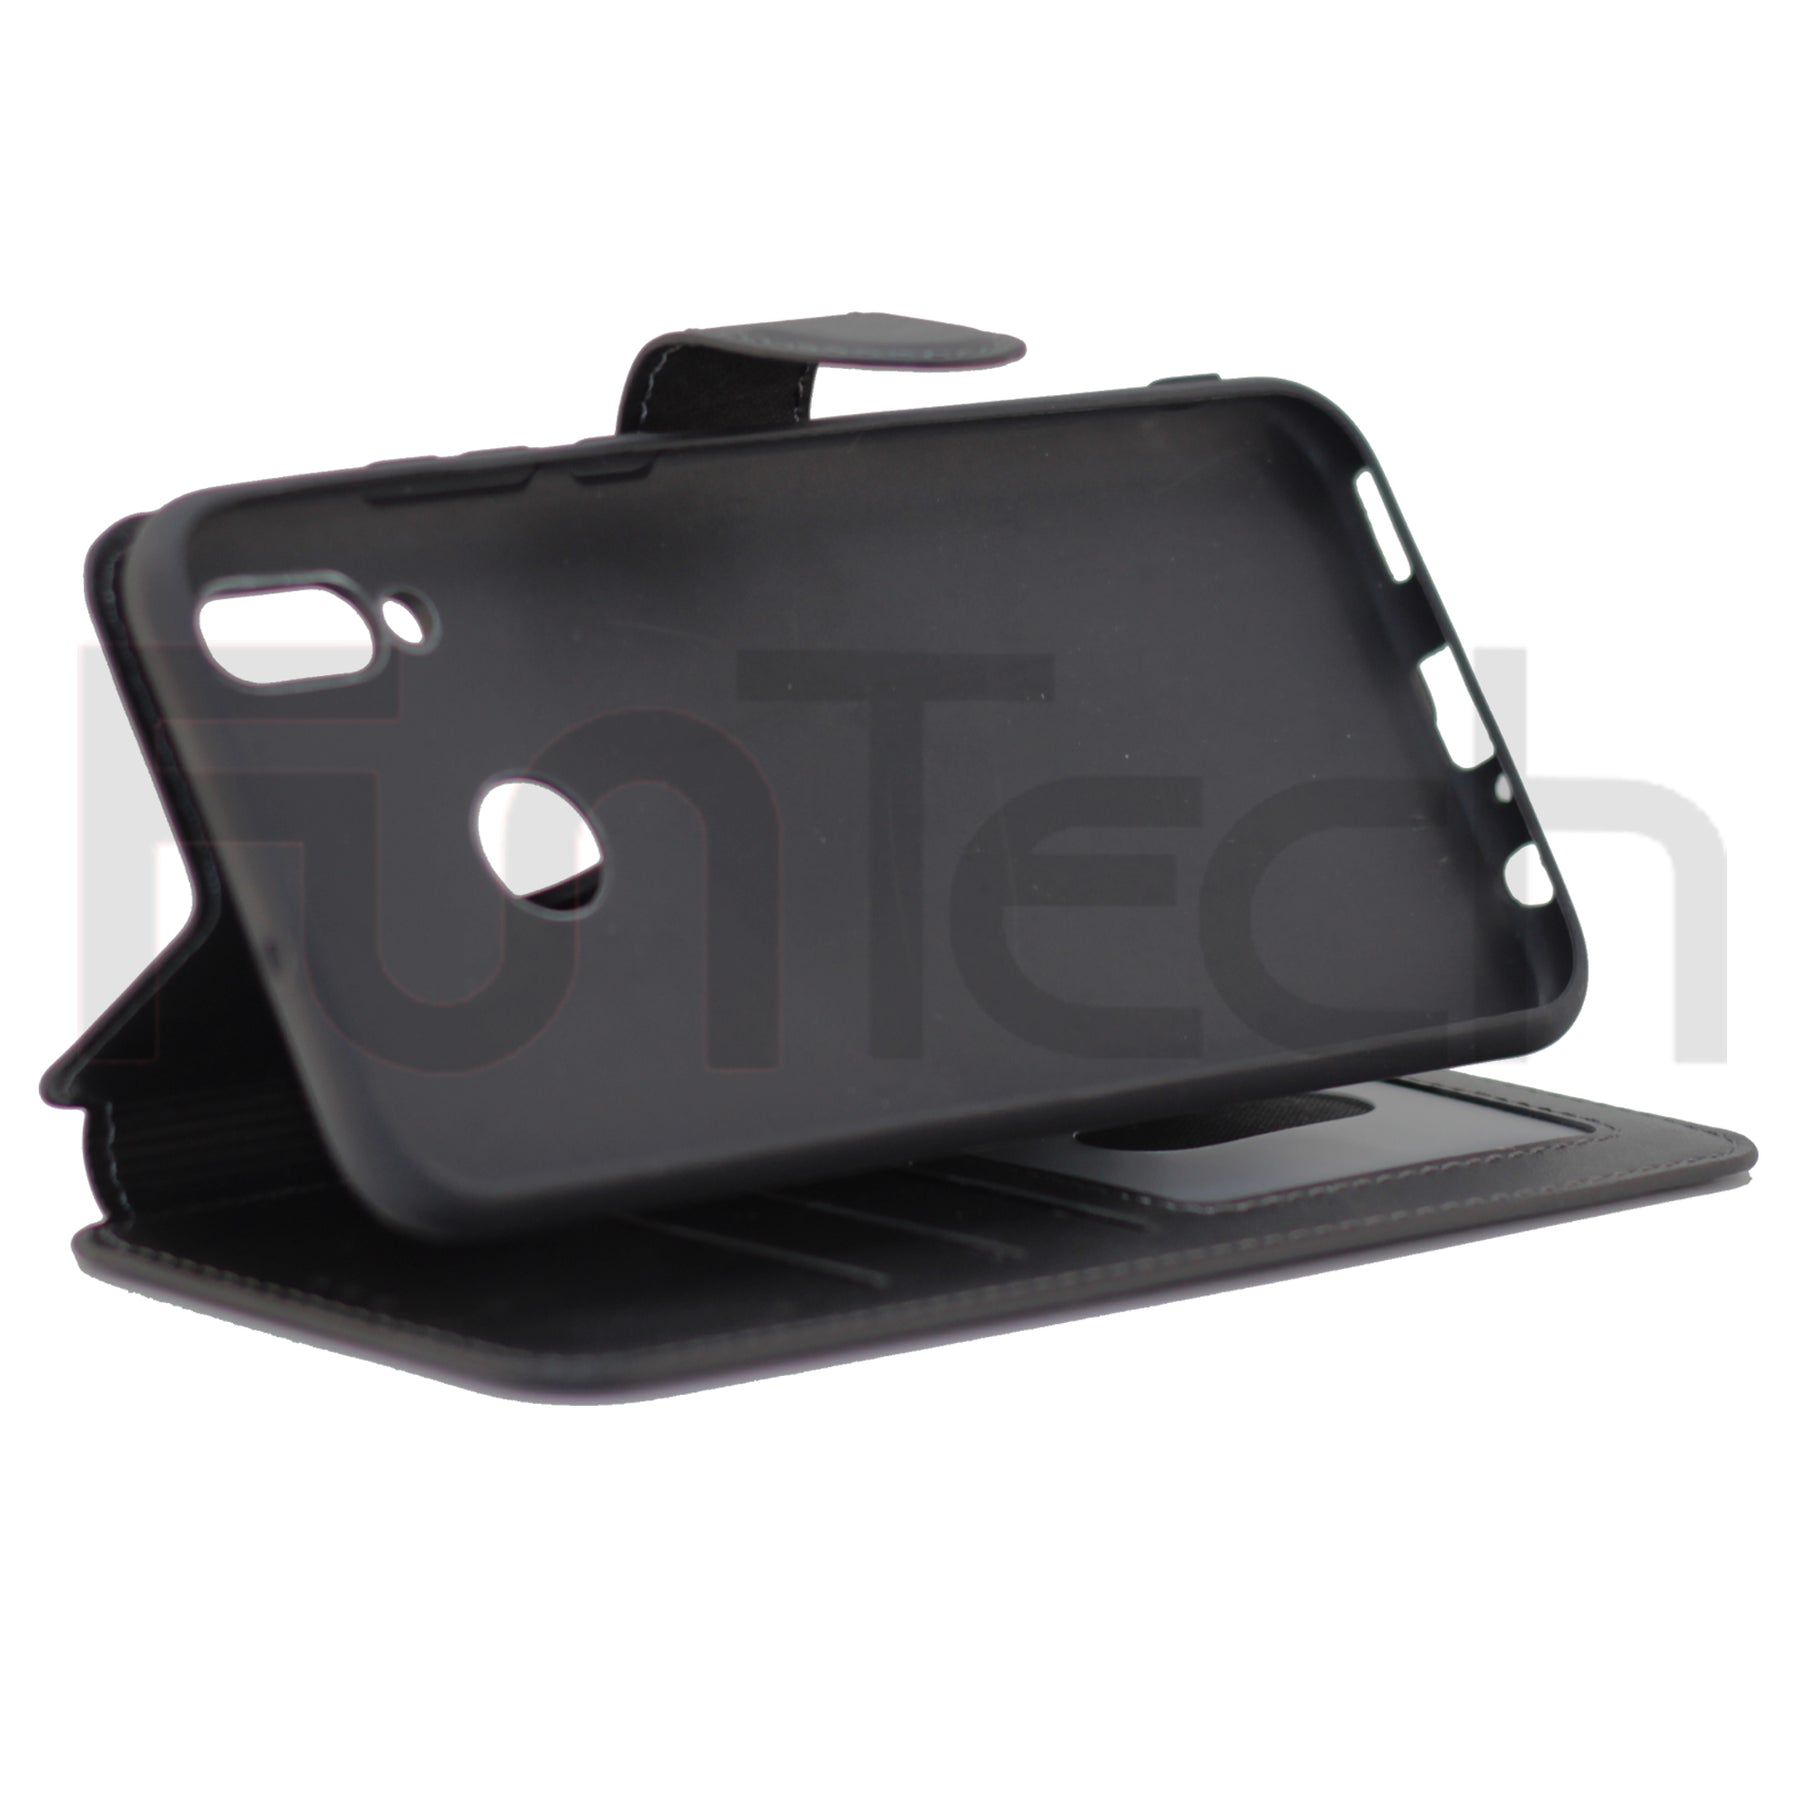 Computer Gadgets Phone Accessories Phone Cover Cases FunTech Telephone Repair Smart Devices Smart IOT